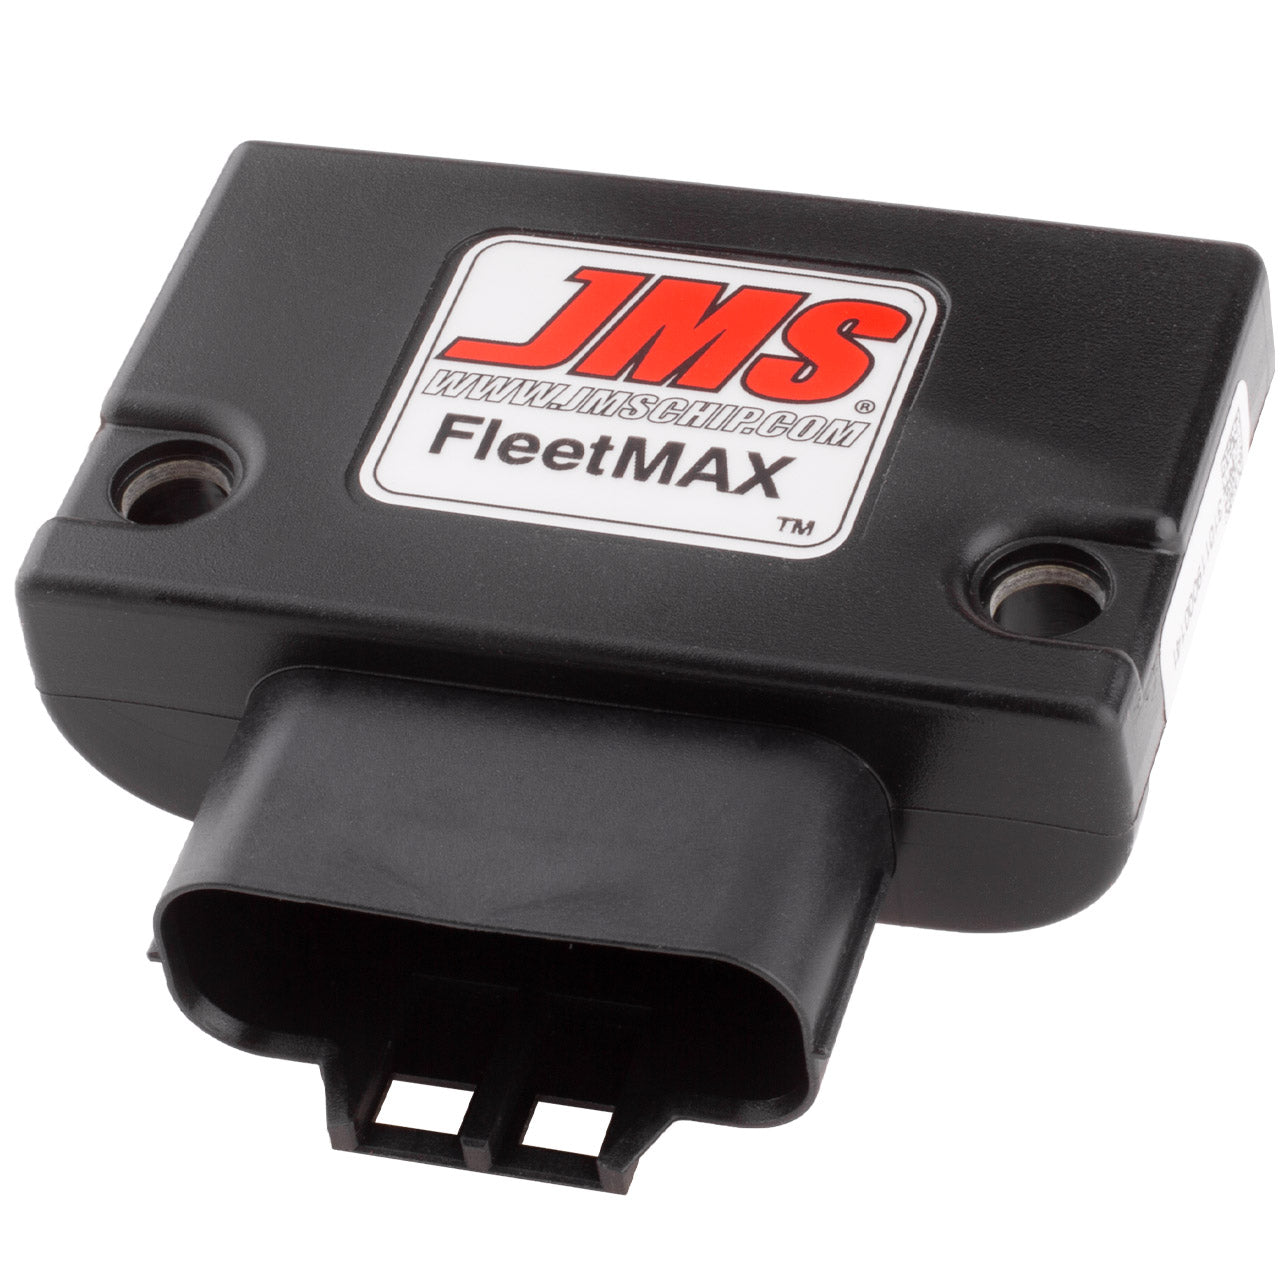 JMS FleetMAX Speed Control Device. Plug and Play for some 2008 - 2021 Dodge Chrysler and Jeep Vehicles with electronic throttle control FX71114DCX2